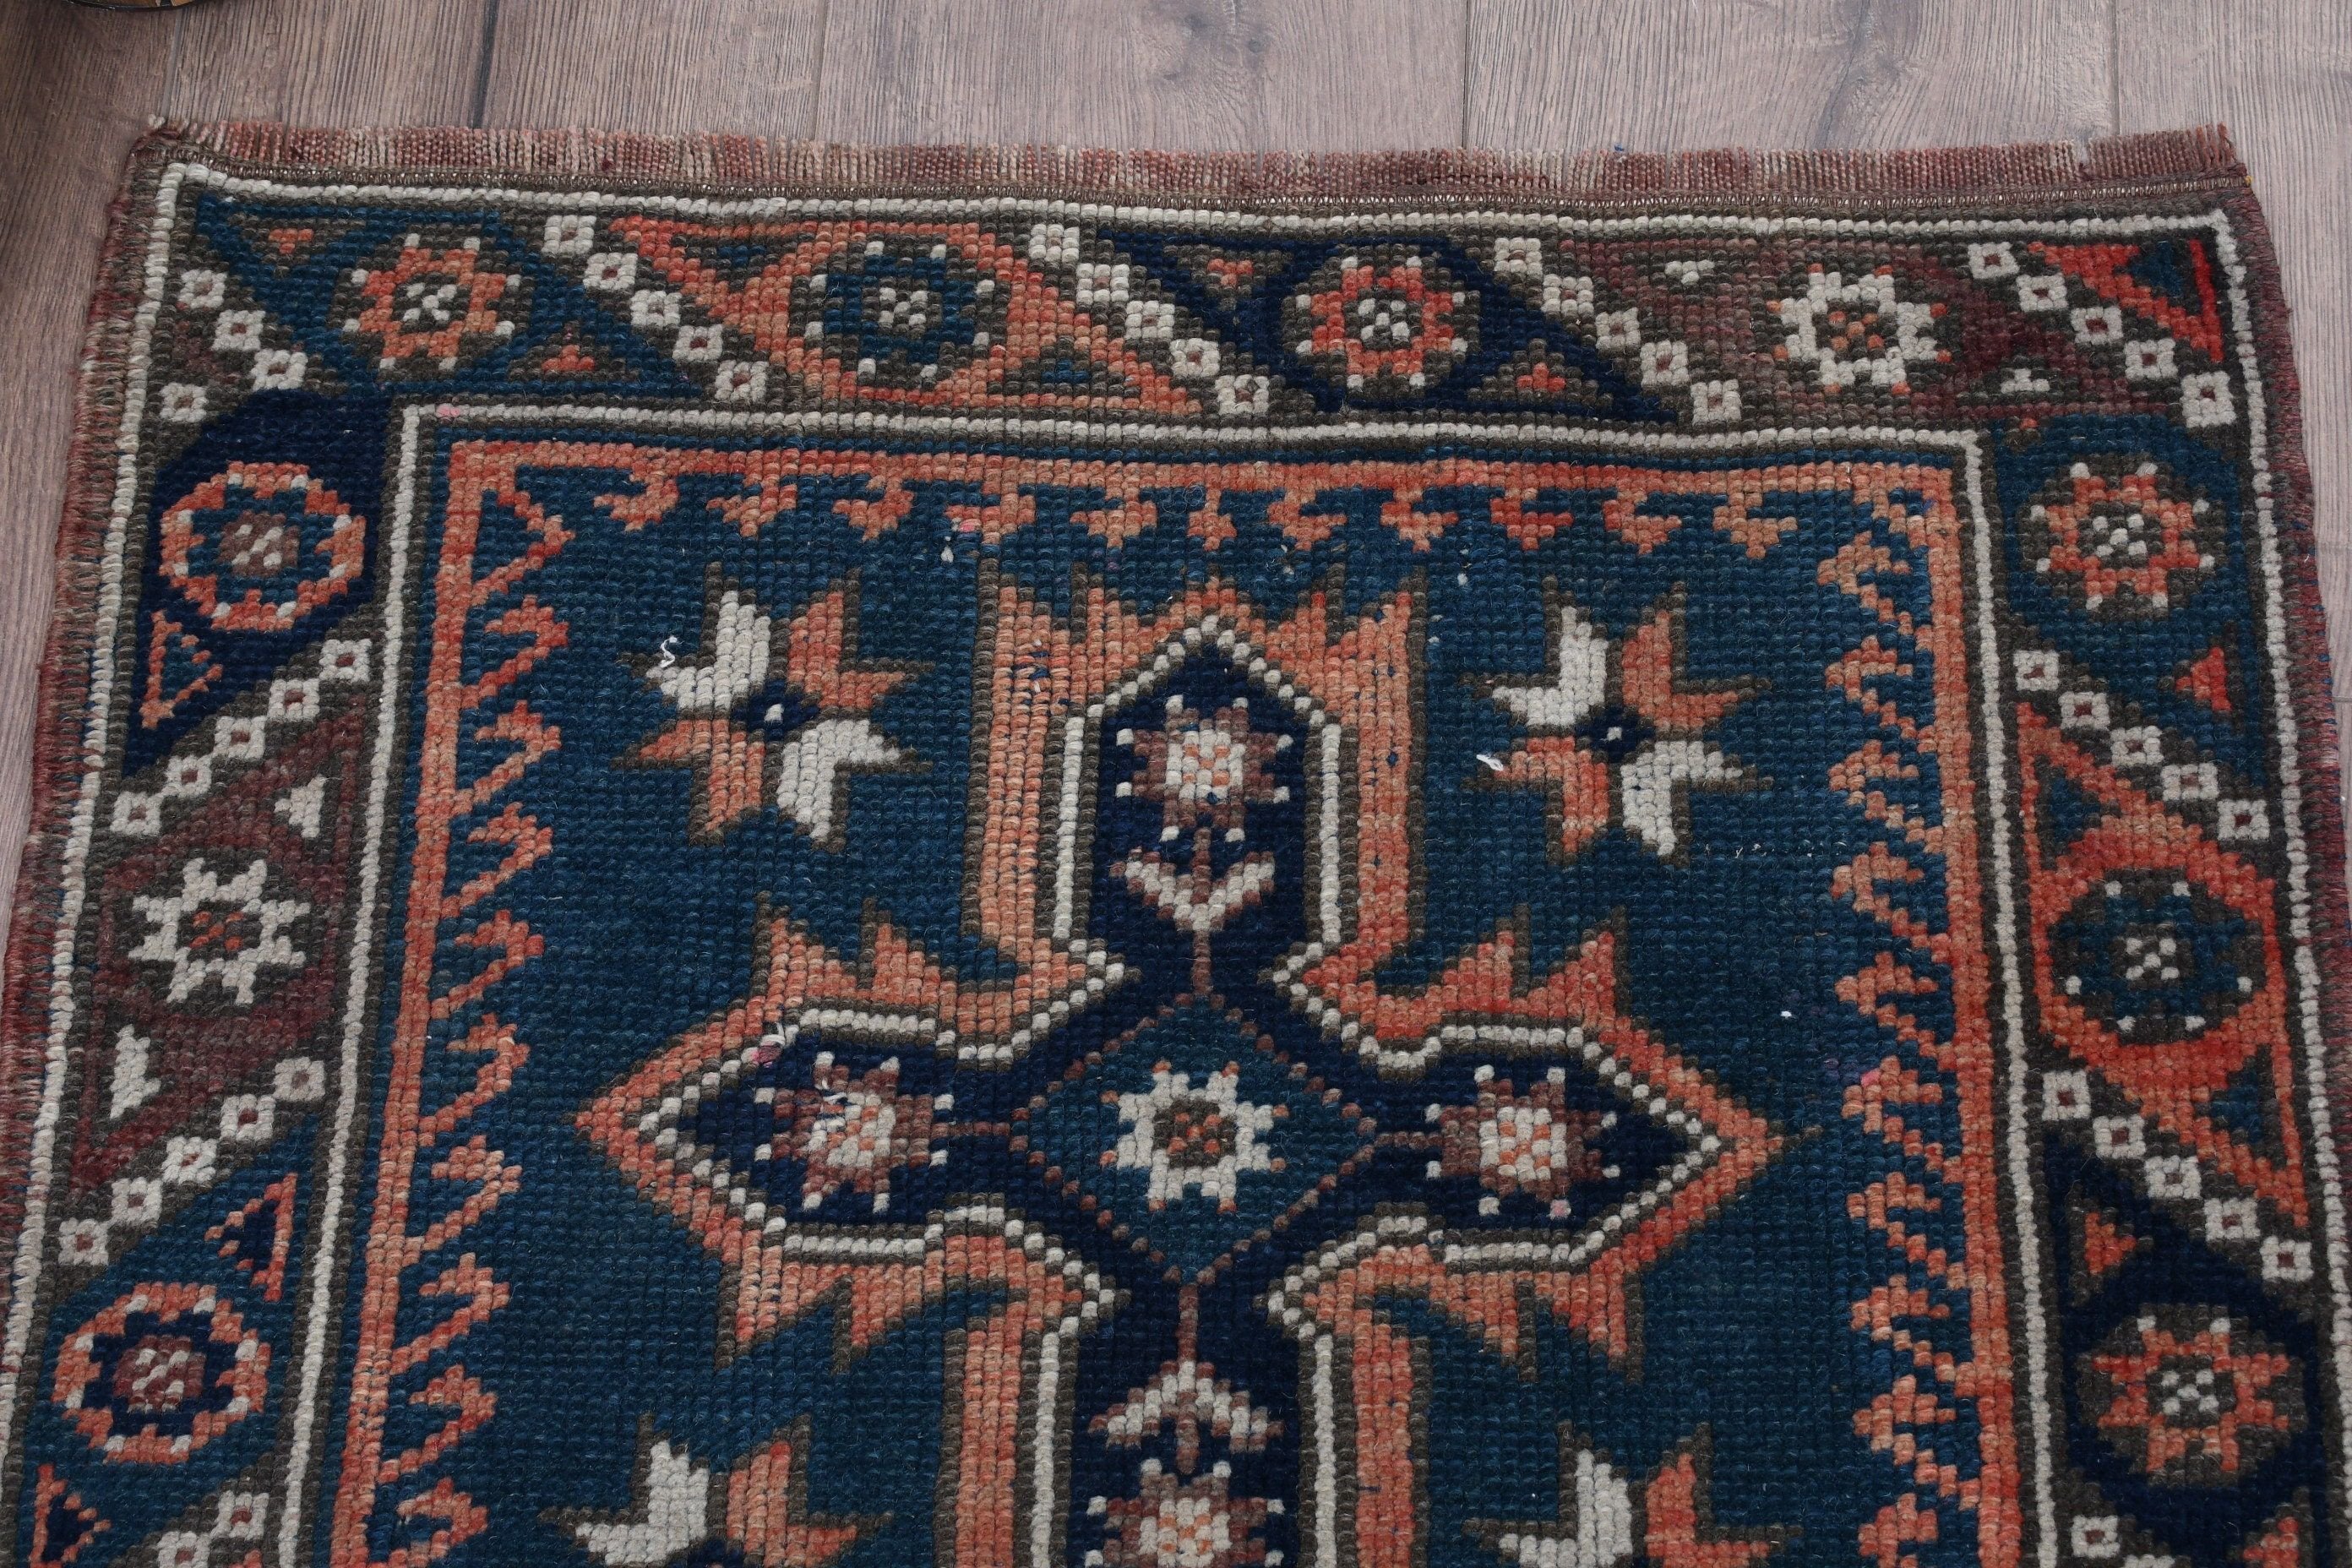 Entry Rug, 2.1x1.9 ft Small Rugs, Blue Kitchen Rug, Moroccan Rug, Oushak Rug, Vintage Rugs, Turkish Rugs, Nursery Rugs, Rugs for Bathroom